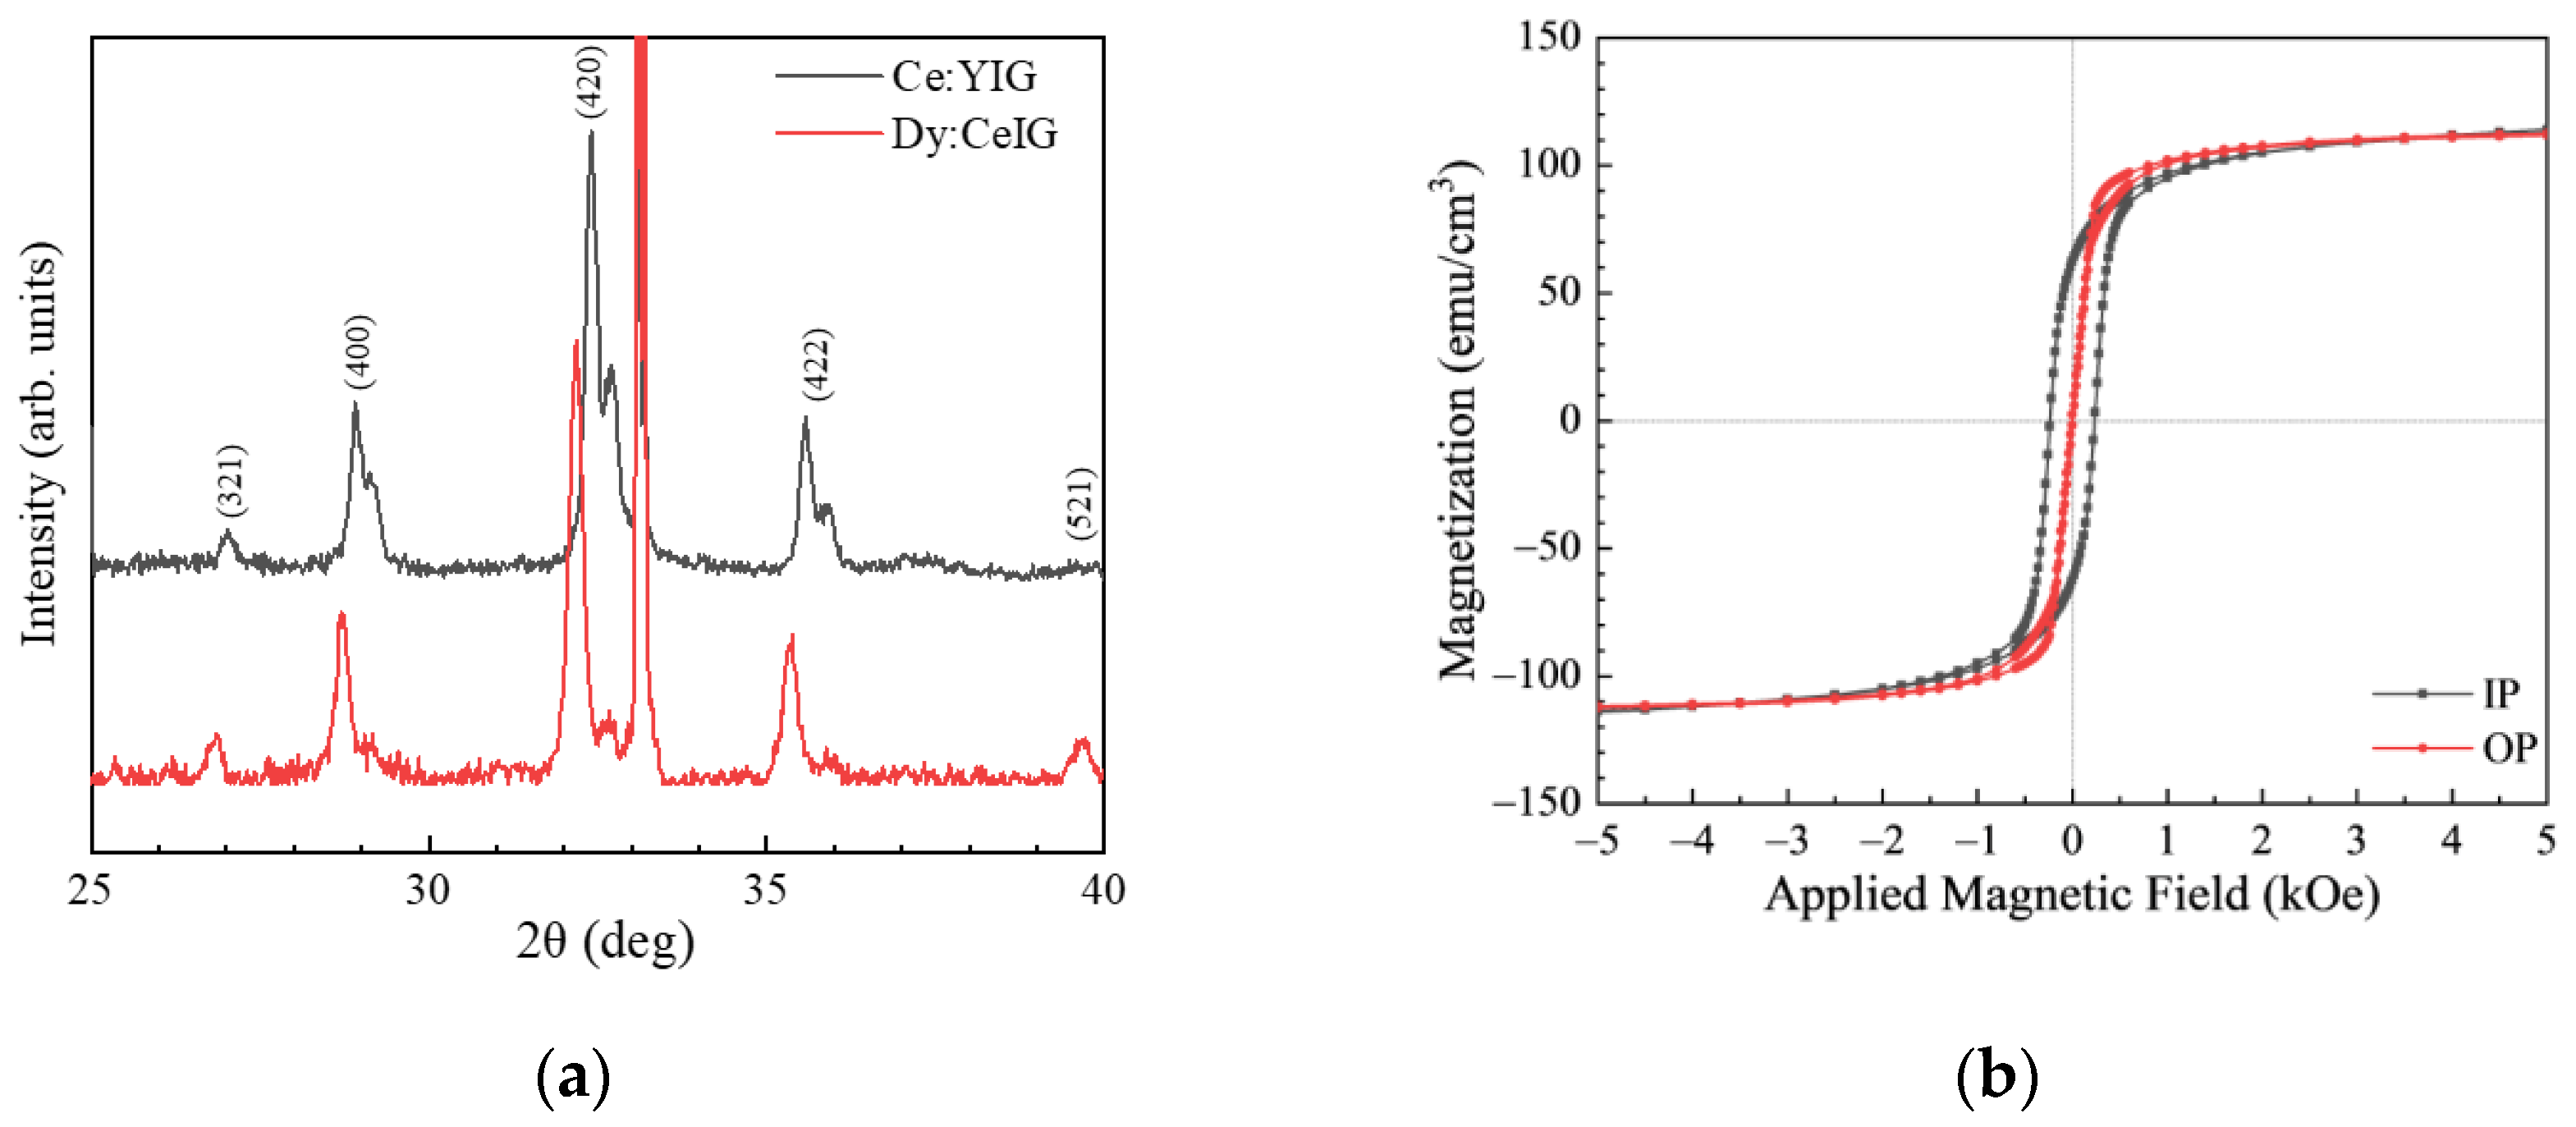 Magnetic hysteresis loops of Ce-YIG on Si(100) substrate annealed at